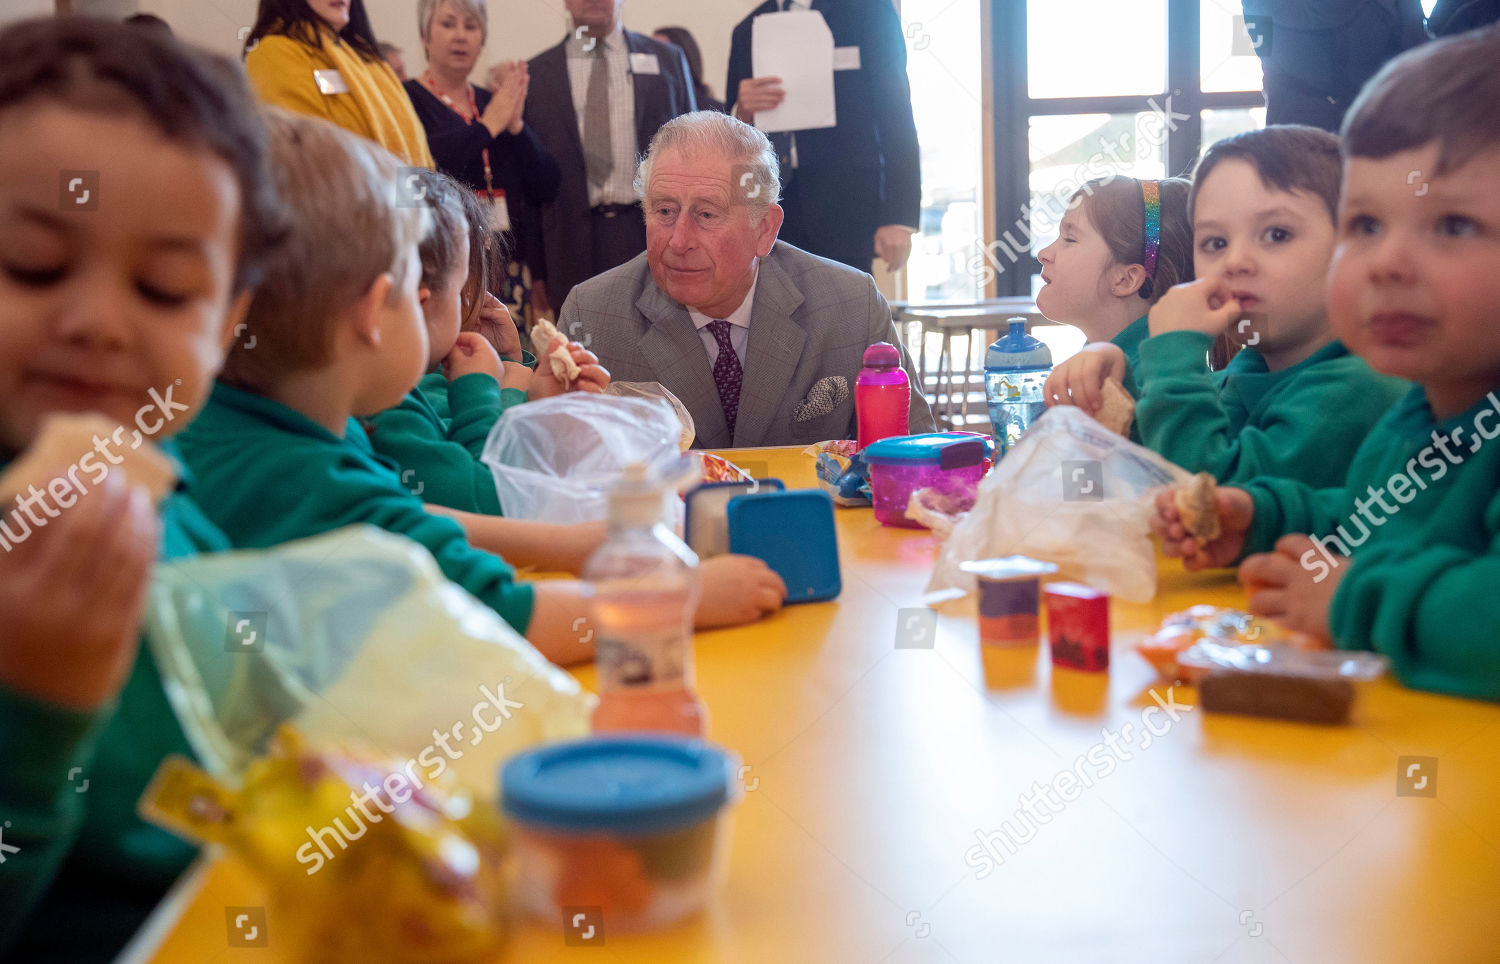 prince-charles-visit-to-bletchingdon-oxfordshire-uk-shutterstock-editorial-10108185a.jpg